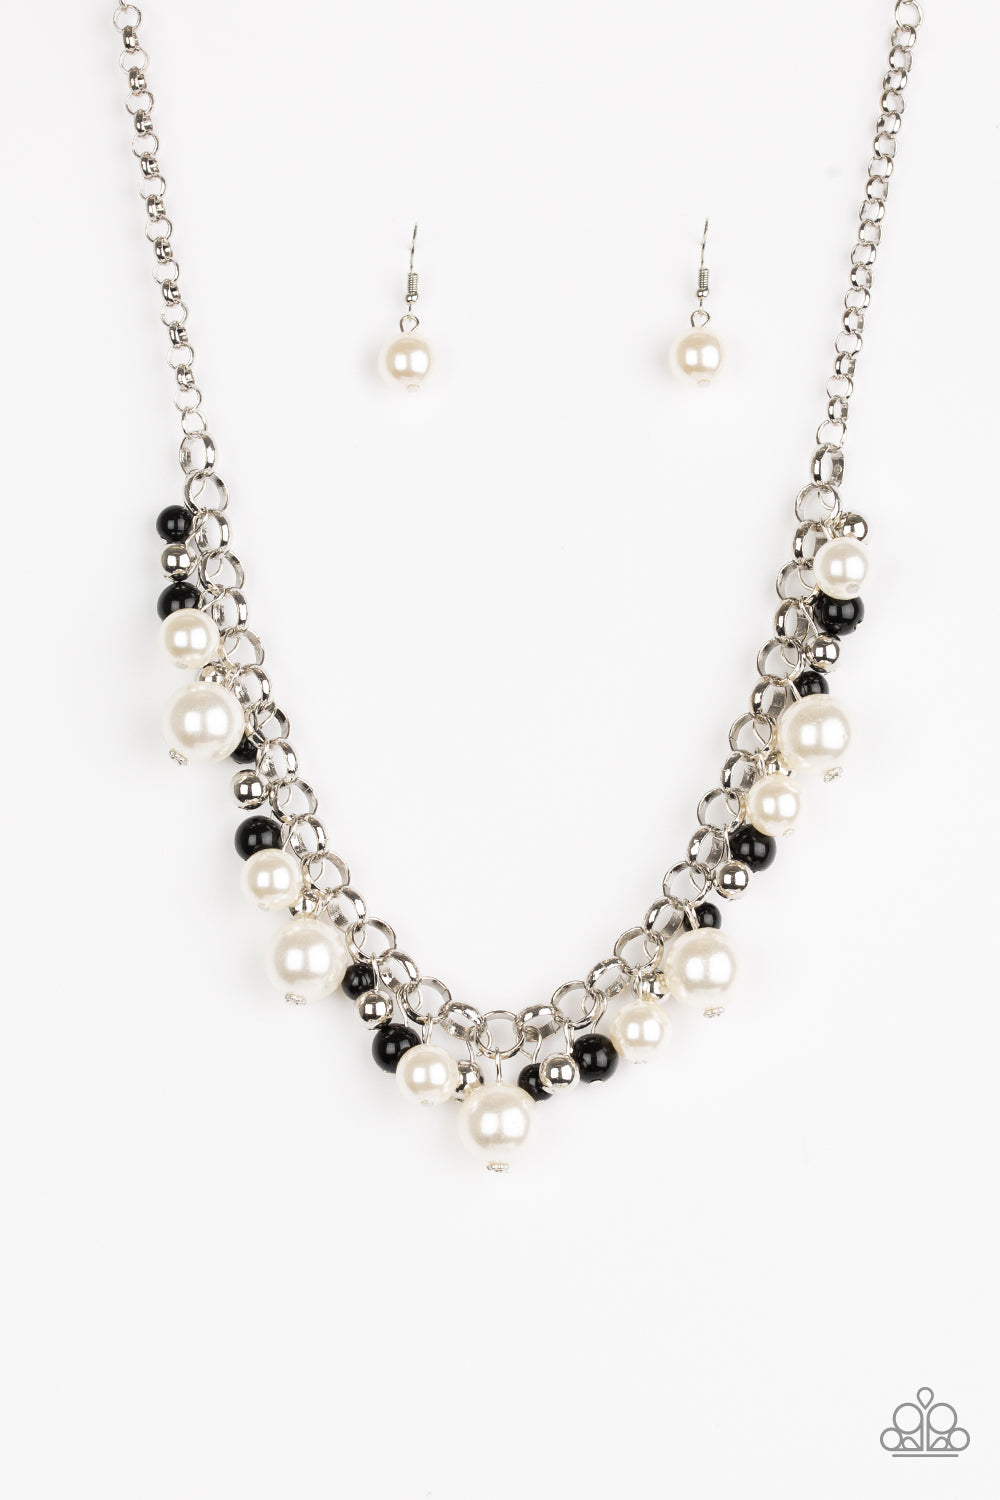 The Upstater - Black and White Pearl Necklace - Paparazzi Accessories -  Varying in size, bubbly white pearls, classic silver beads, and shiny black beads swing from the bottom of a glistening silver chain, creating a refined fringe below the collar. Features an adjustable clasp closure. Bejeweled Accessories By Kristie - Trendy fashion jewelry for everyone -